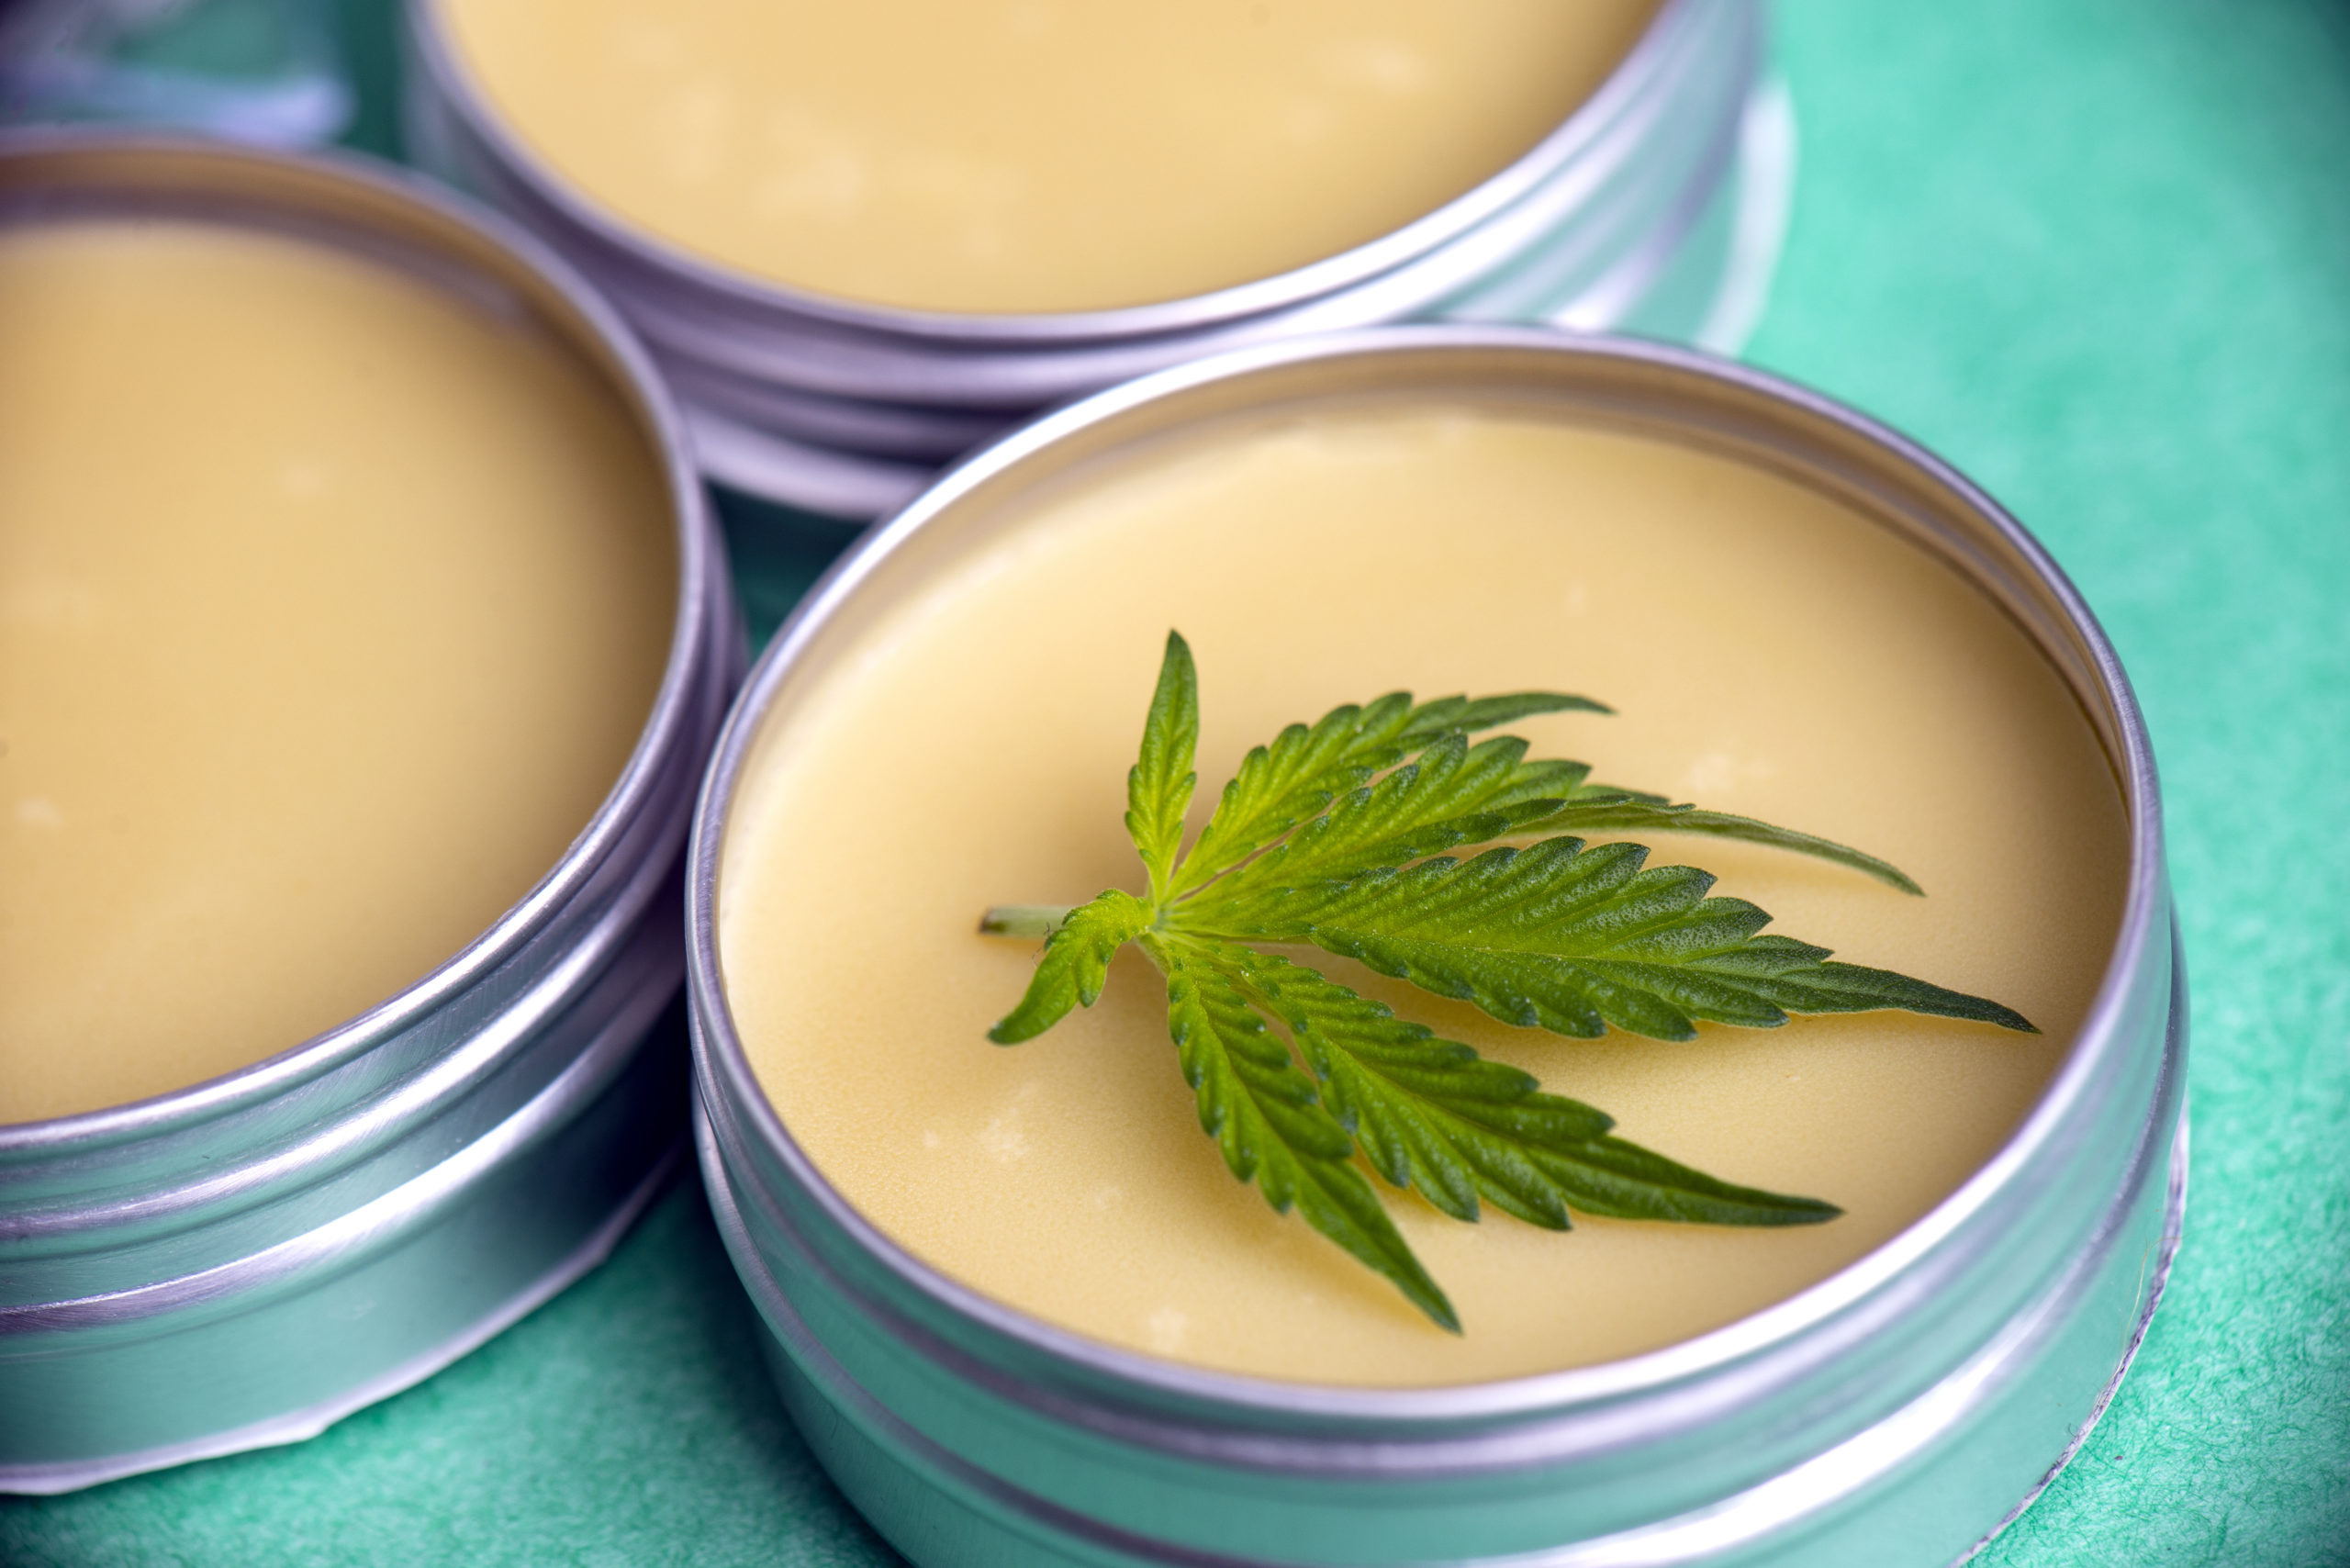 What Is CBD Cooling Cream Used For